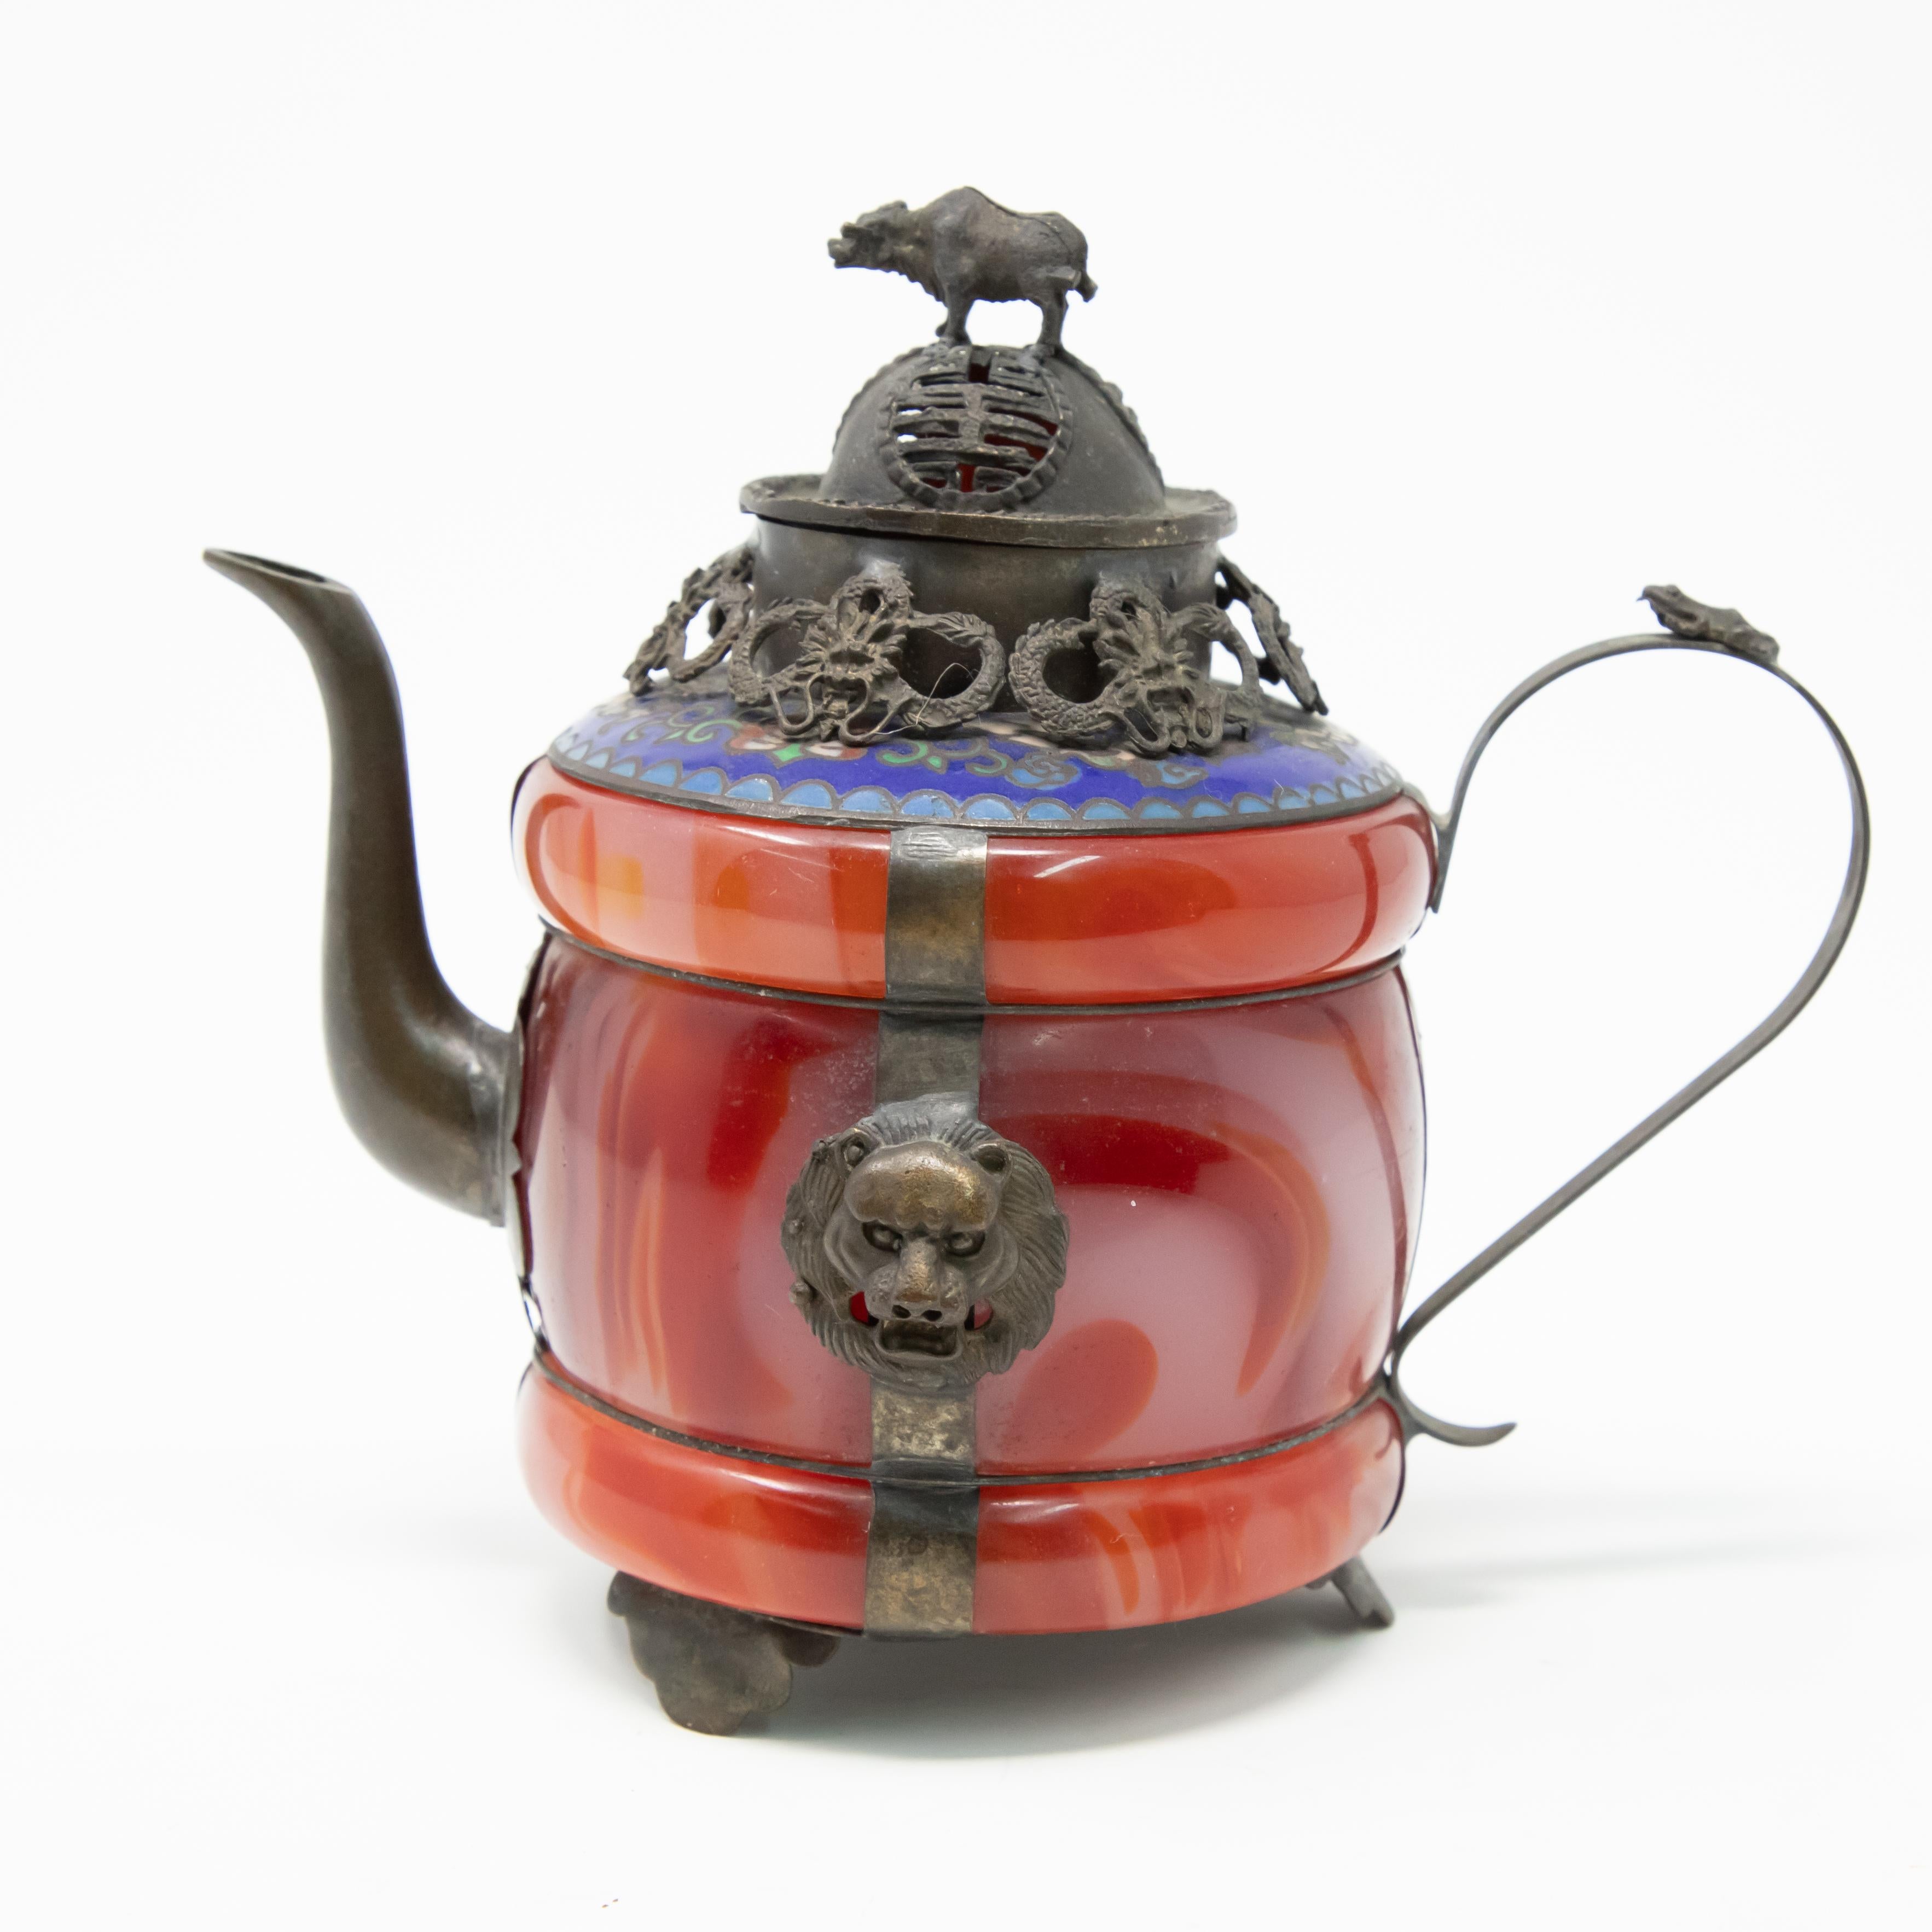 Offering this unmatchable Chinese teapot made of carnelian stone with enameled bronze and filigree. Starting on a footed bronze base the carnelian stone is attached with bronze bands to the base. Off of one of the bands the handle is attached with a